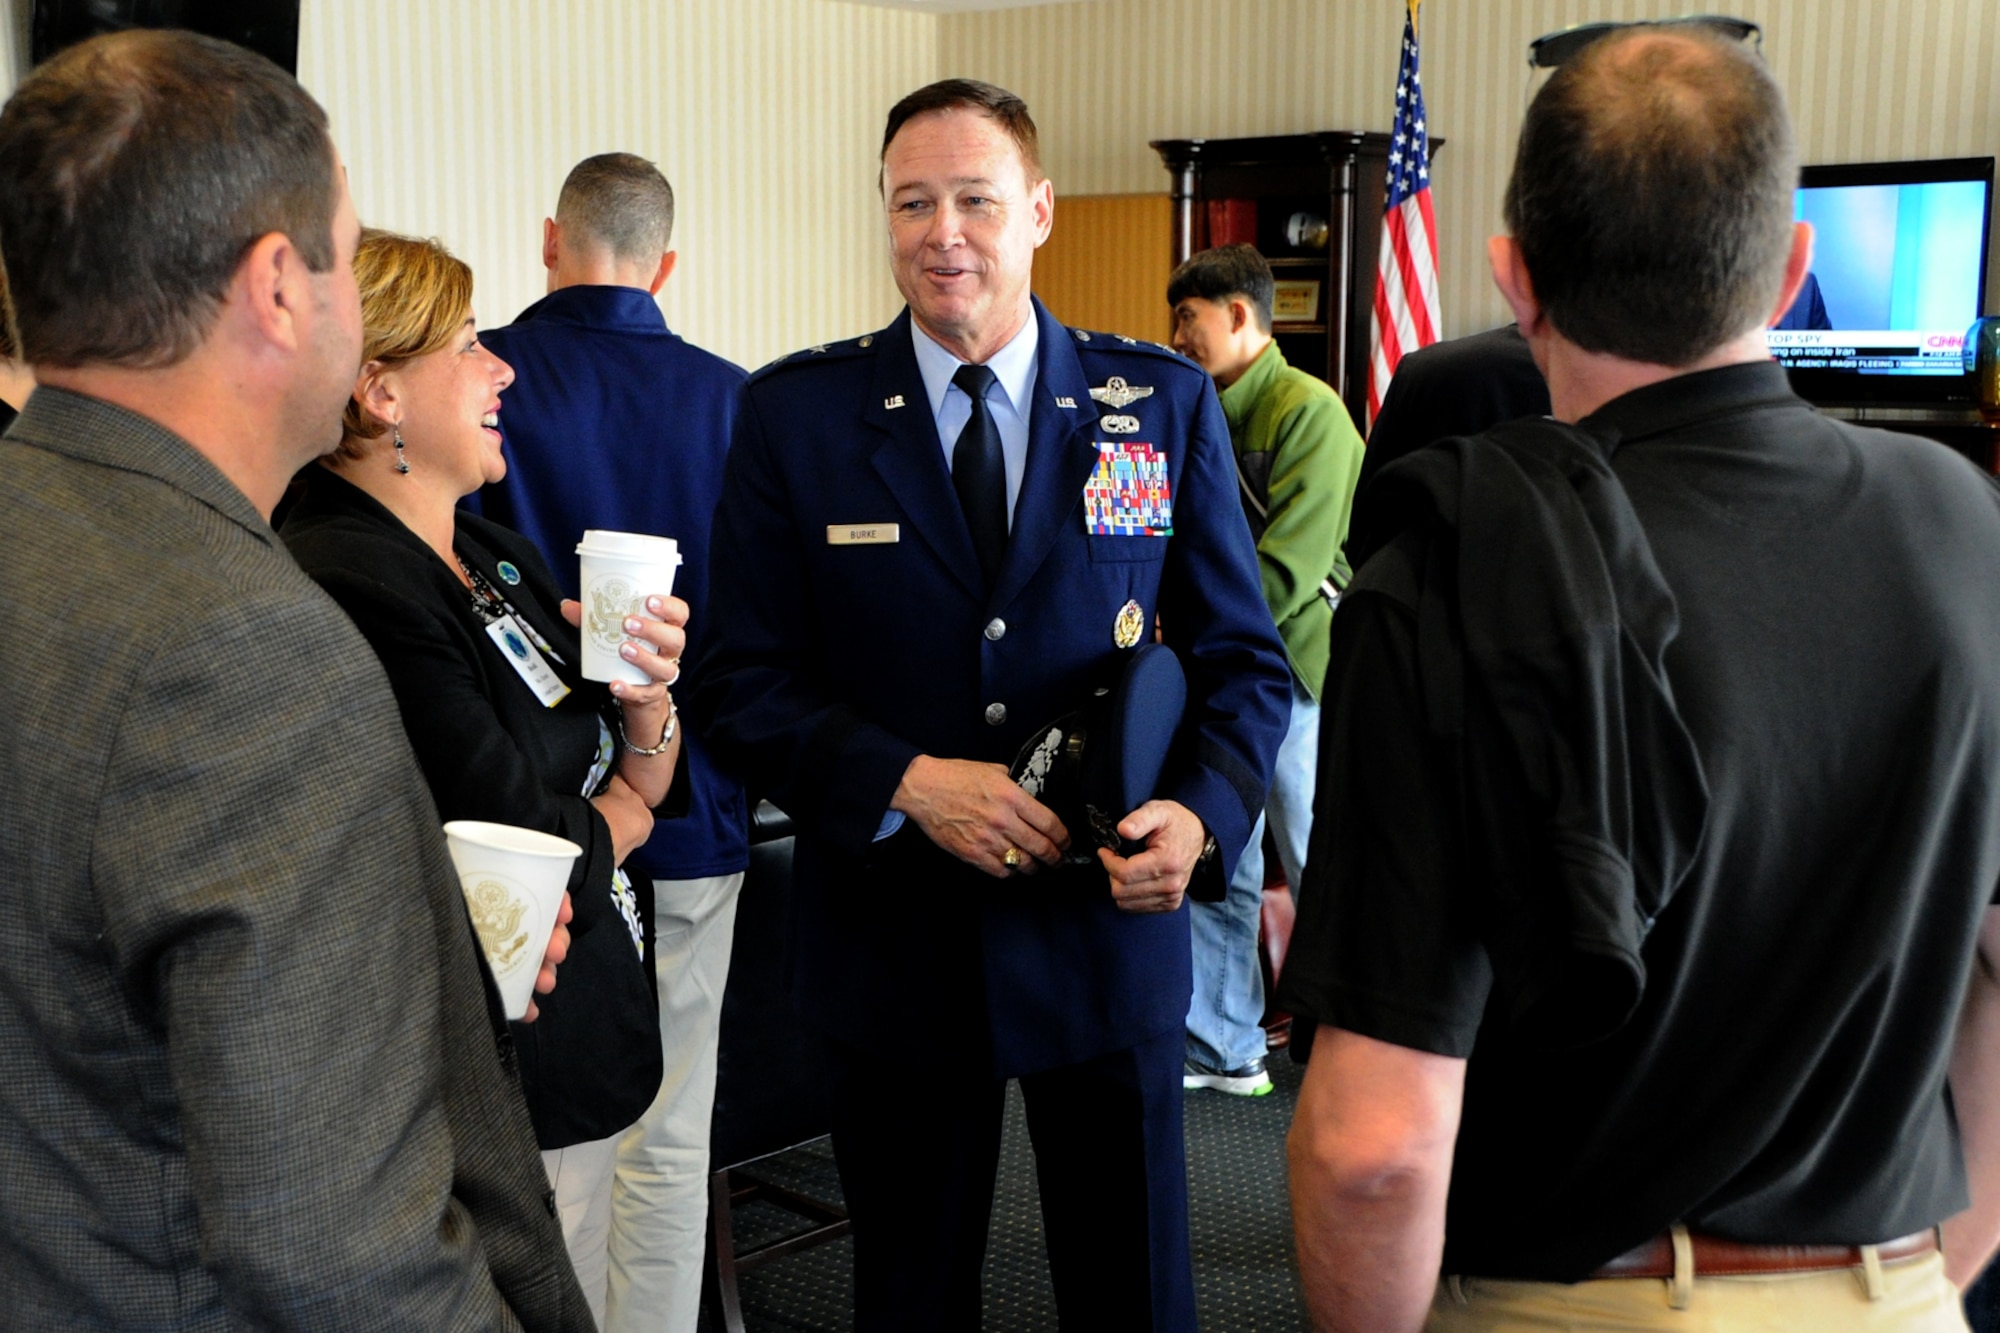 Air Force District of Washington Commander Maj. Gen. Darryl Burke greets Air Force leaders from the Pacific region on Joint Base Andrews, Md., Sep. 13. The leaders are visiting as part of the Pacific Air Chiefs’ Symposium, one of the Air Force's multilateral engagement opportunities used to build relationships with Pacific countries and to enhance theater security cooperation. The Air Force District of Washington brings air, space and cyberspace capabilities to the joint team protecting the nation's capital, and supports local personnel and those serving worldwide. (U.S. Air Force photo/Staff Sgt. Matt Davis)